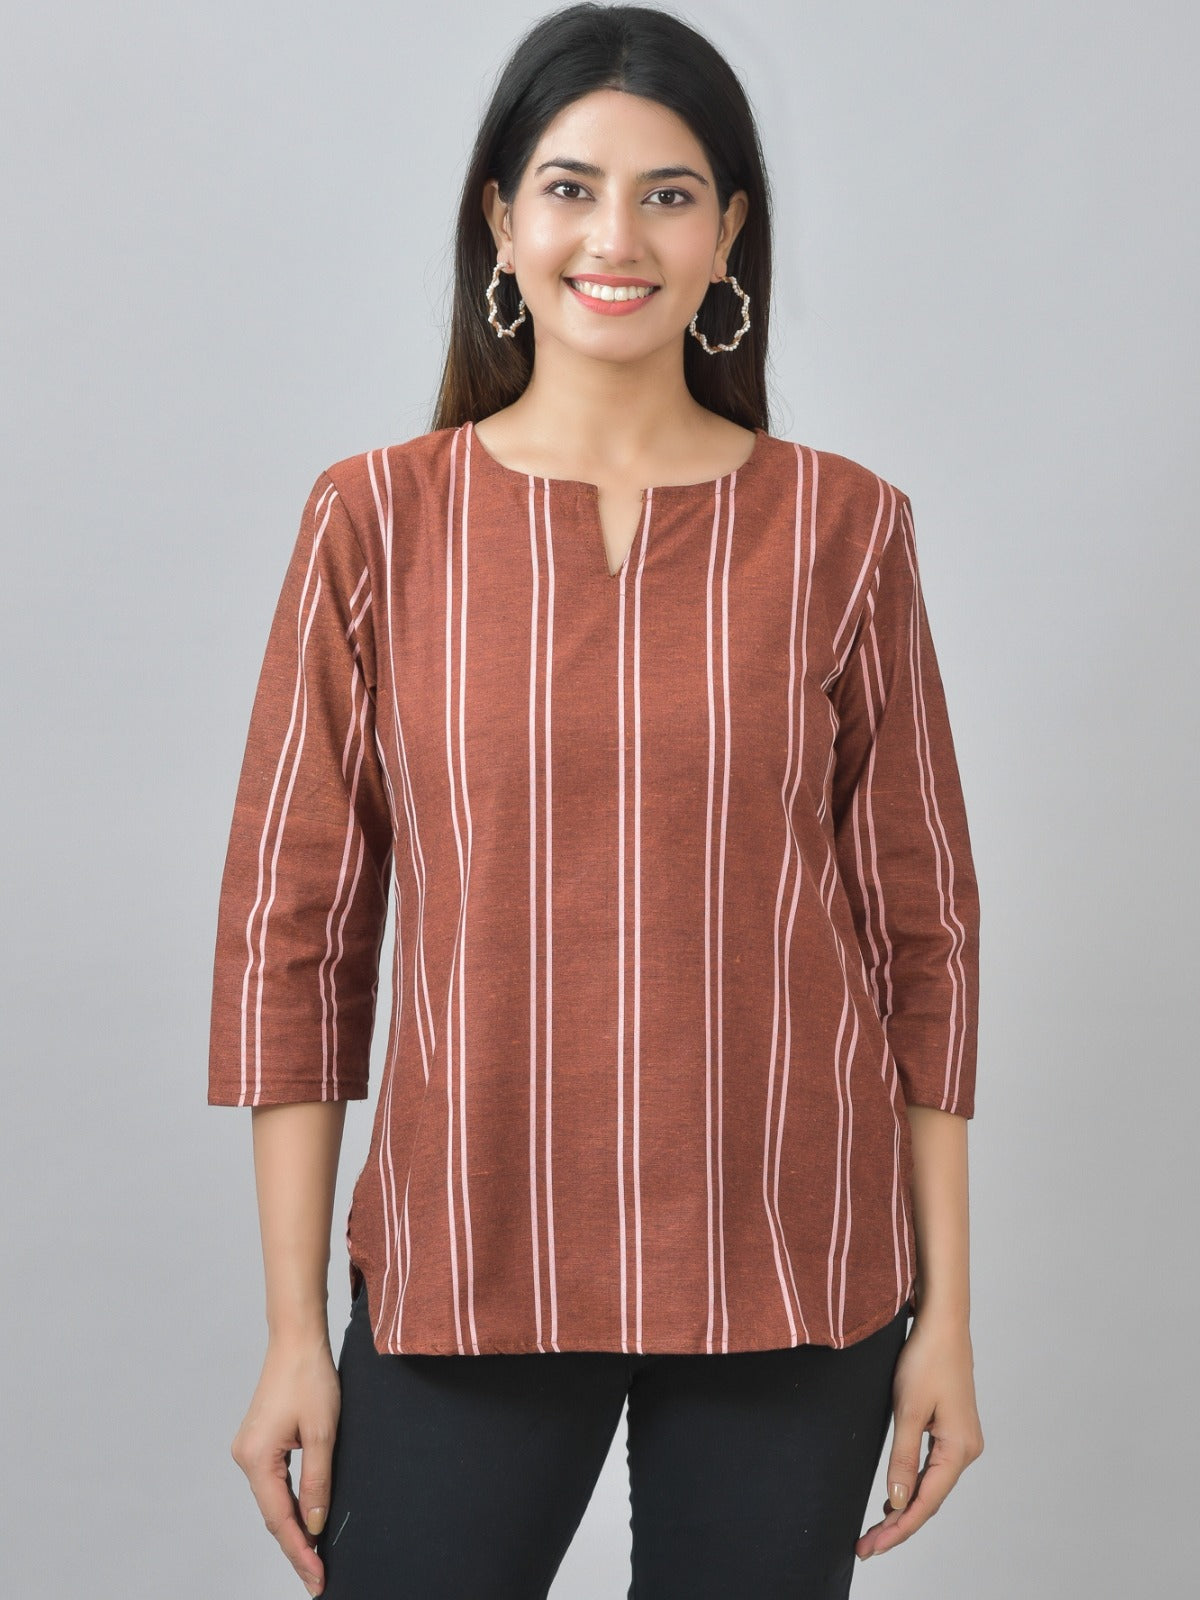 Pack Of 2 Brown And Grey Striped Cotton Womens Top Combo